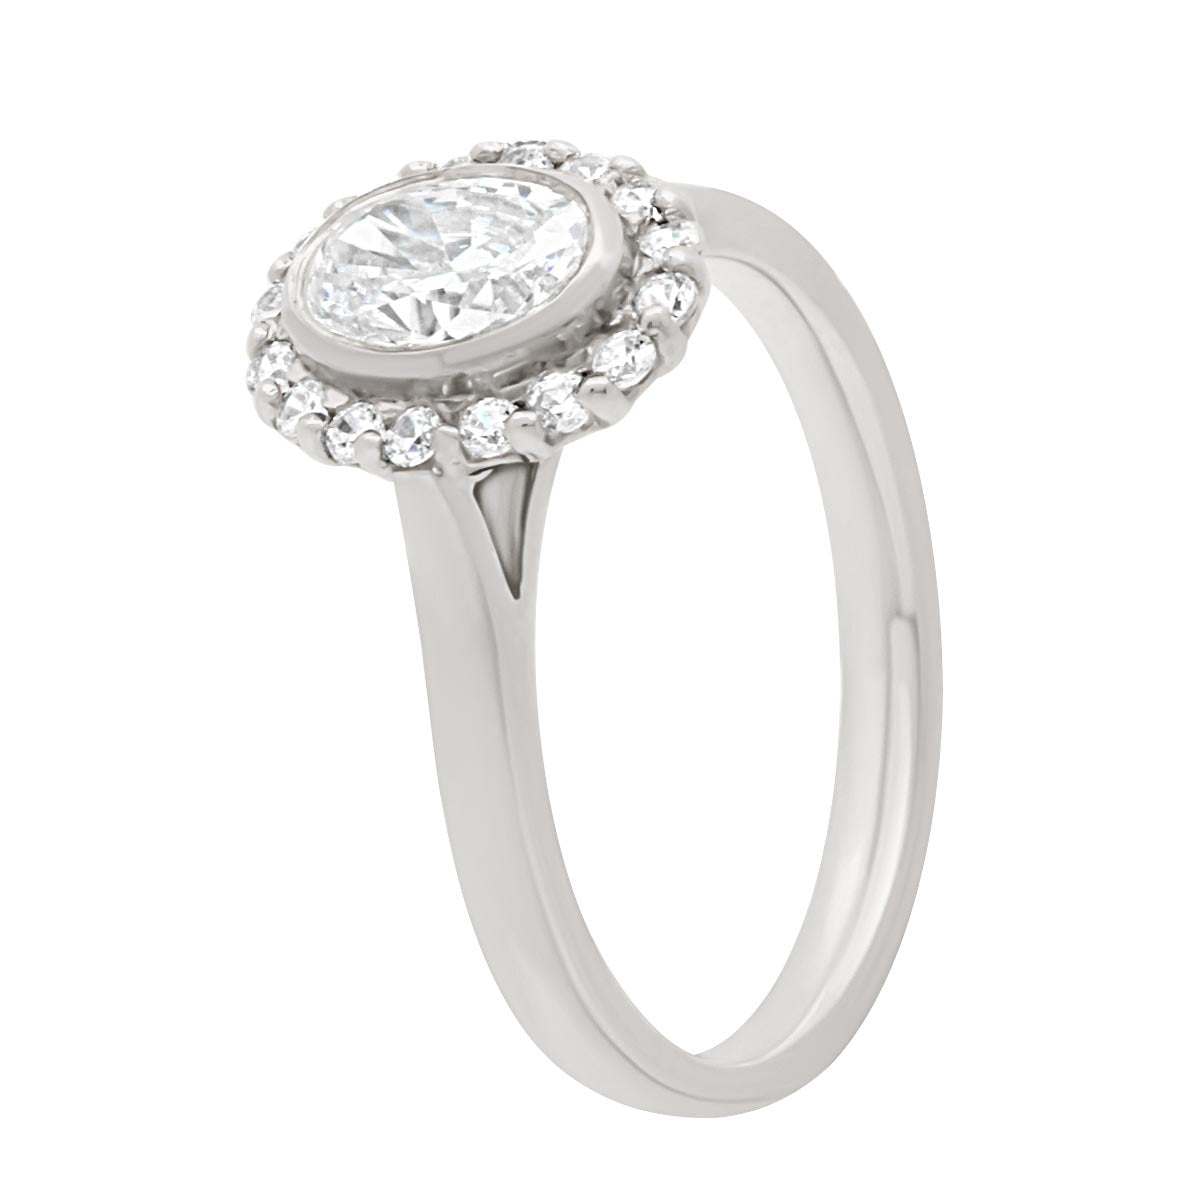  Oval Halo Diamond Ring in white gold upright angled